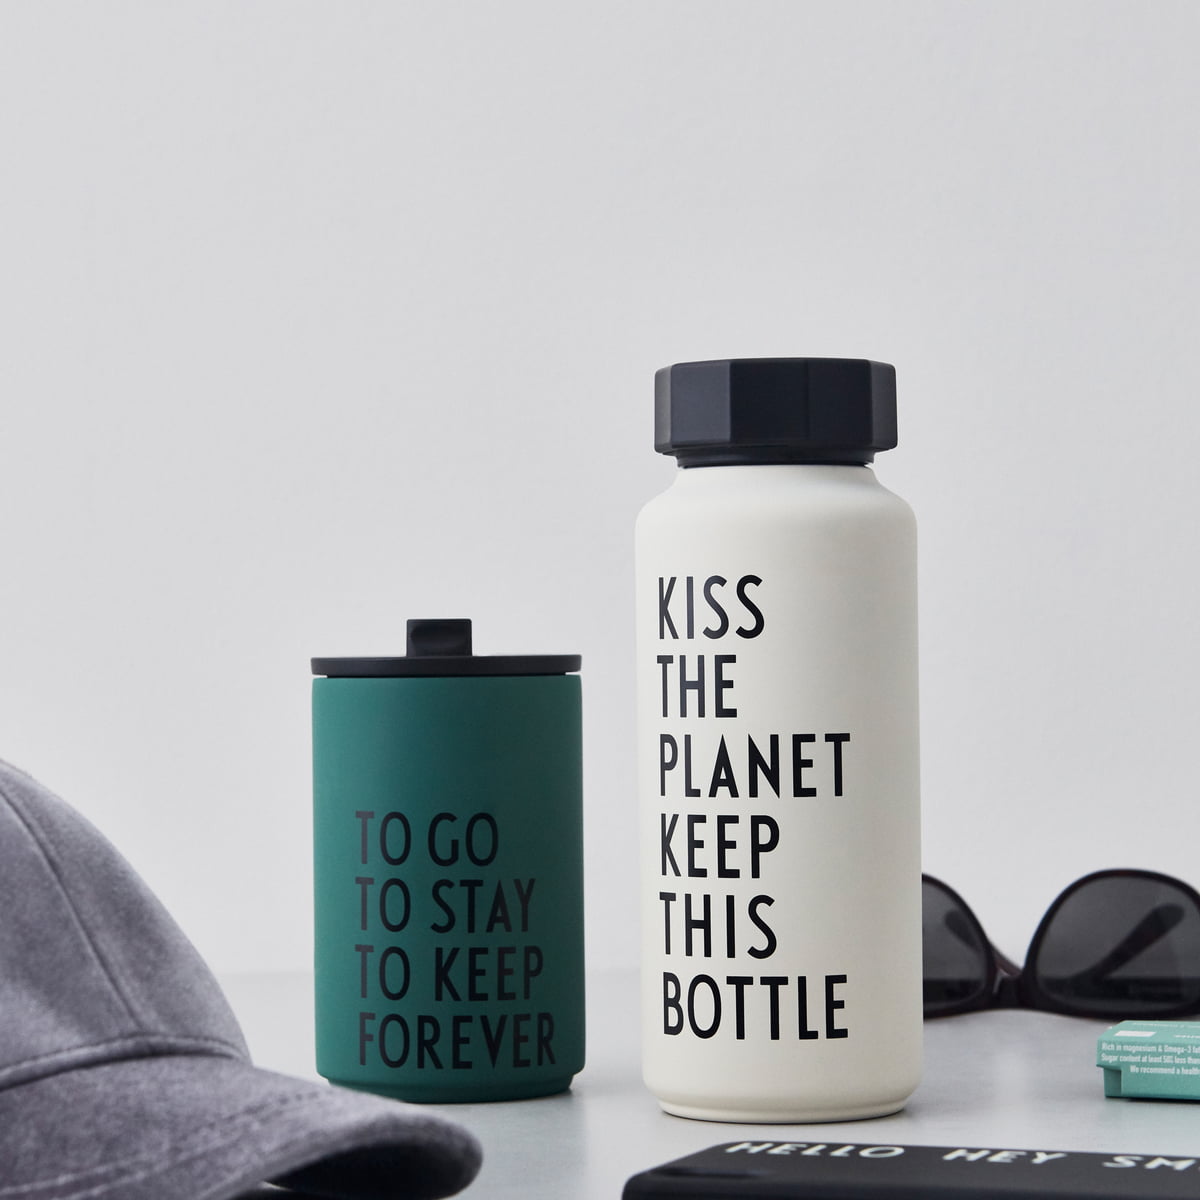 https://cdn.connox.com/m/100035/265726/media/Design-Letters/AJ-Thermosflasche-Hot-and-Cold/Design-Letters-AJ-Thermosflasche-Hot-Cold-0-5-l-Kiss-The-Planet-Keep-This-Bottle-weiss-Sonderedition-Ambiente.jpg